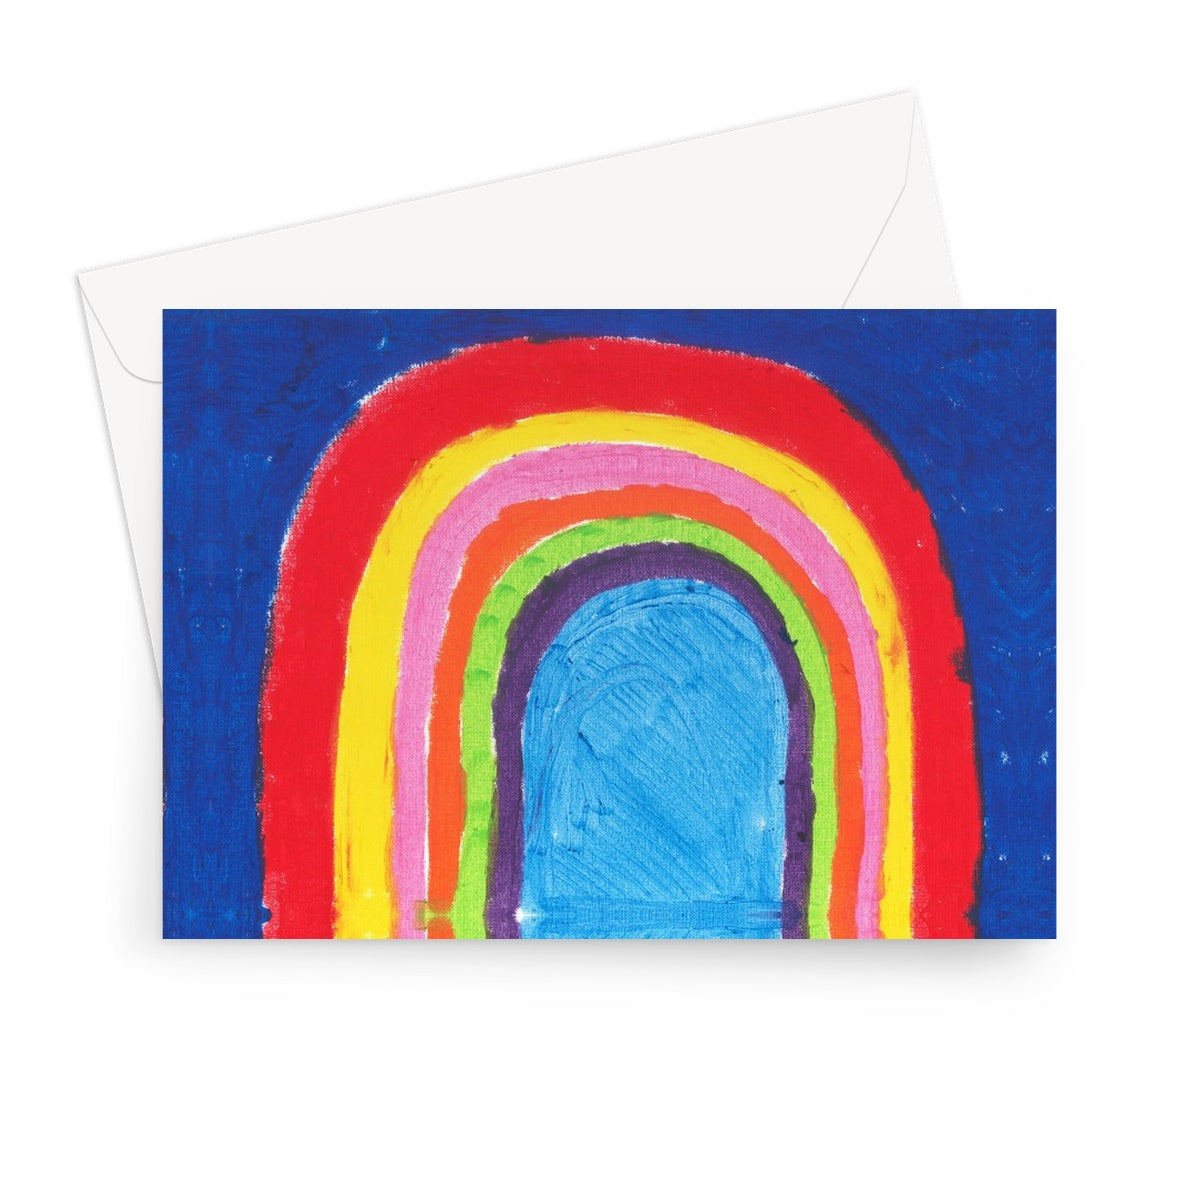 Always a Smile, Greeting Card